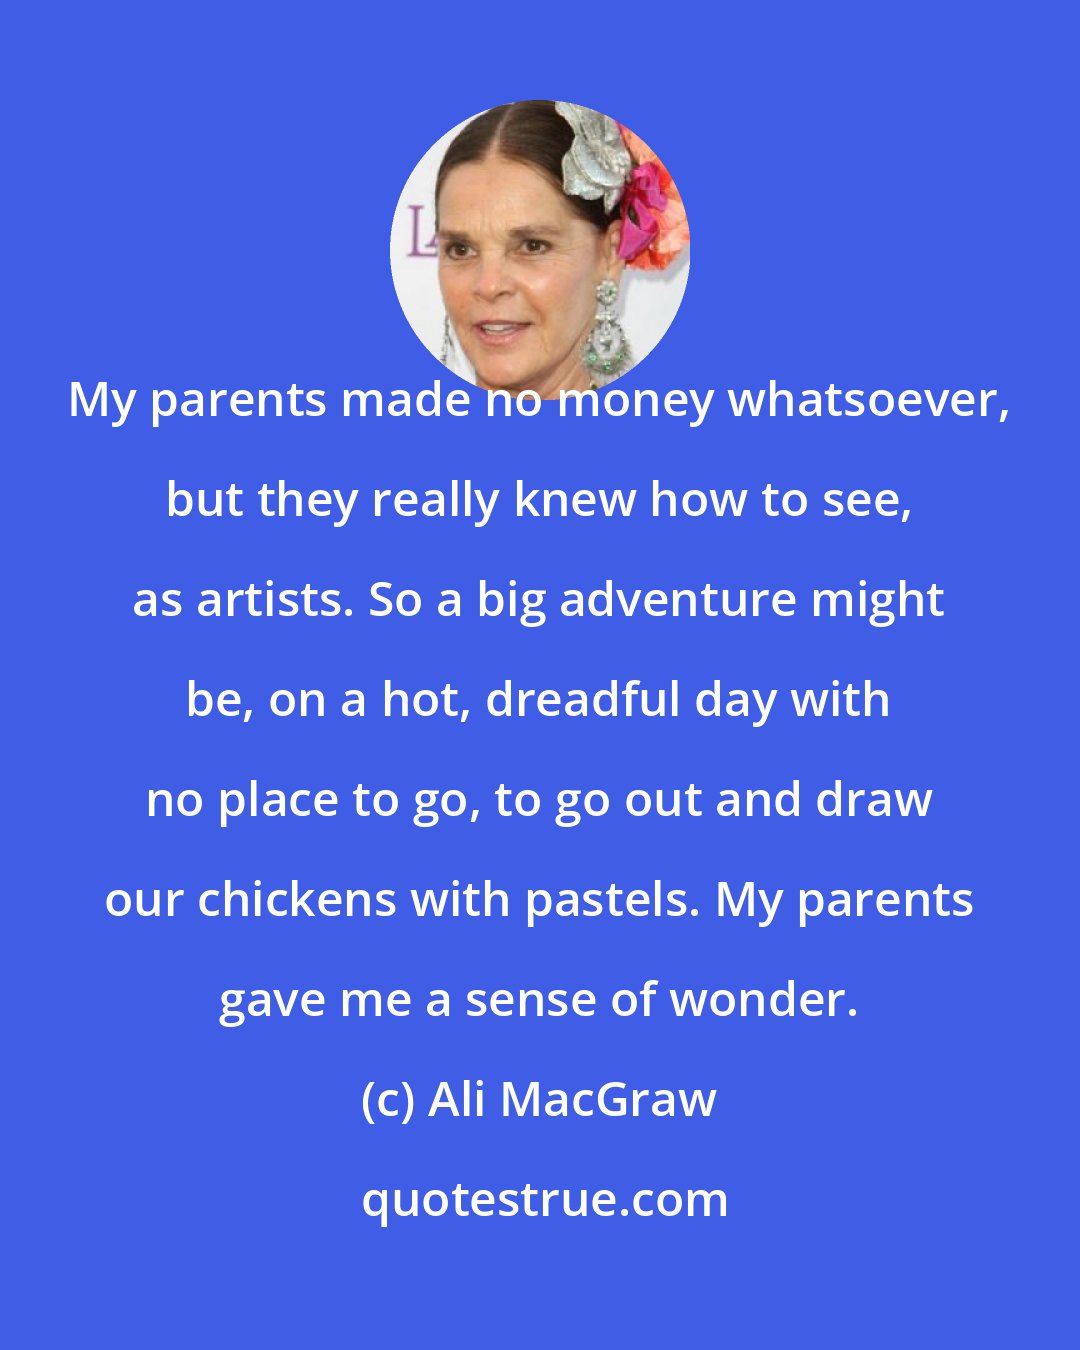 Ali MacGraw: My parents made no money whatsoever, but they really knew how to see, as artists. So a big adventure might be, on a hot, dreadful day with no place to go, to go out and draw our chickens with pastels. My parents gave me a sense of wonder.